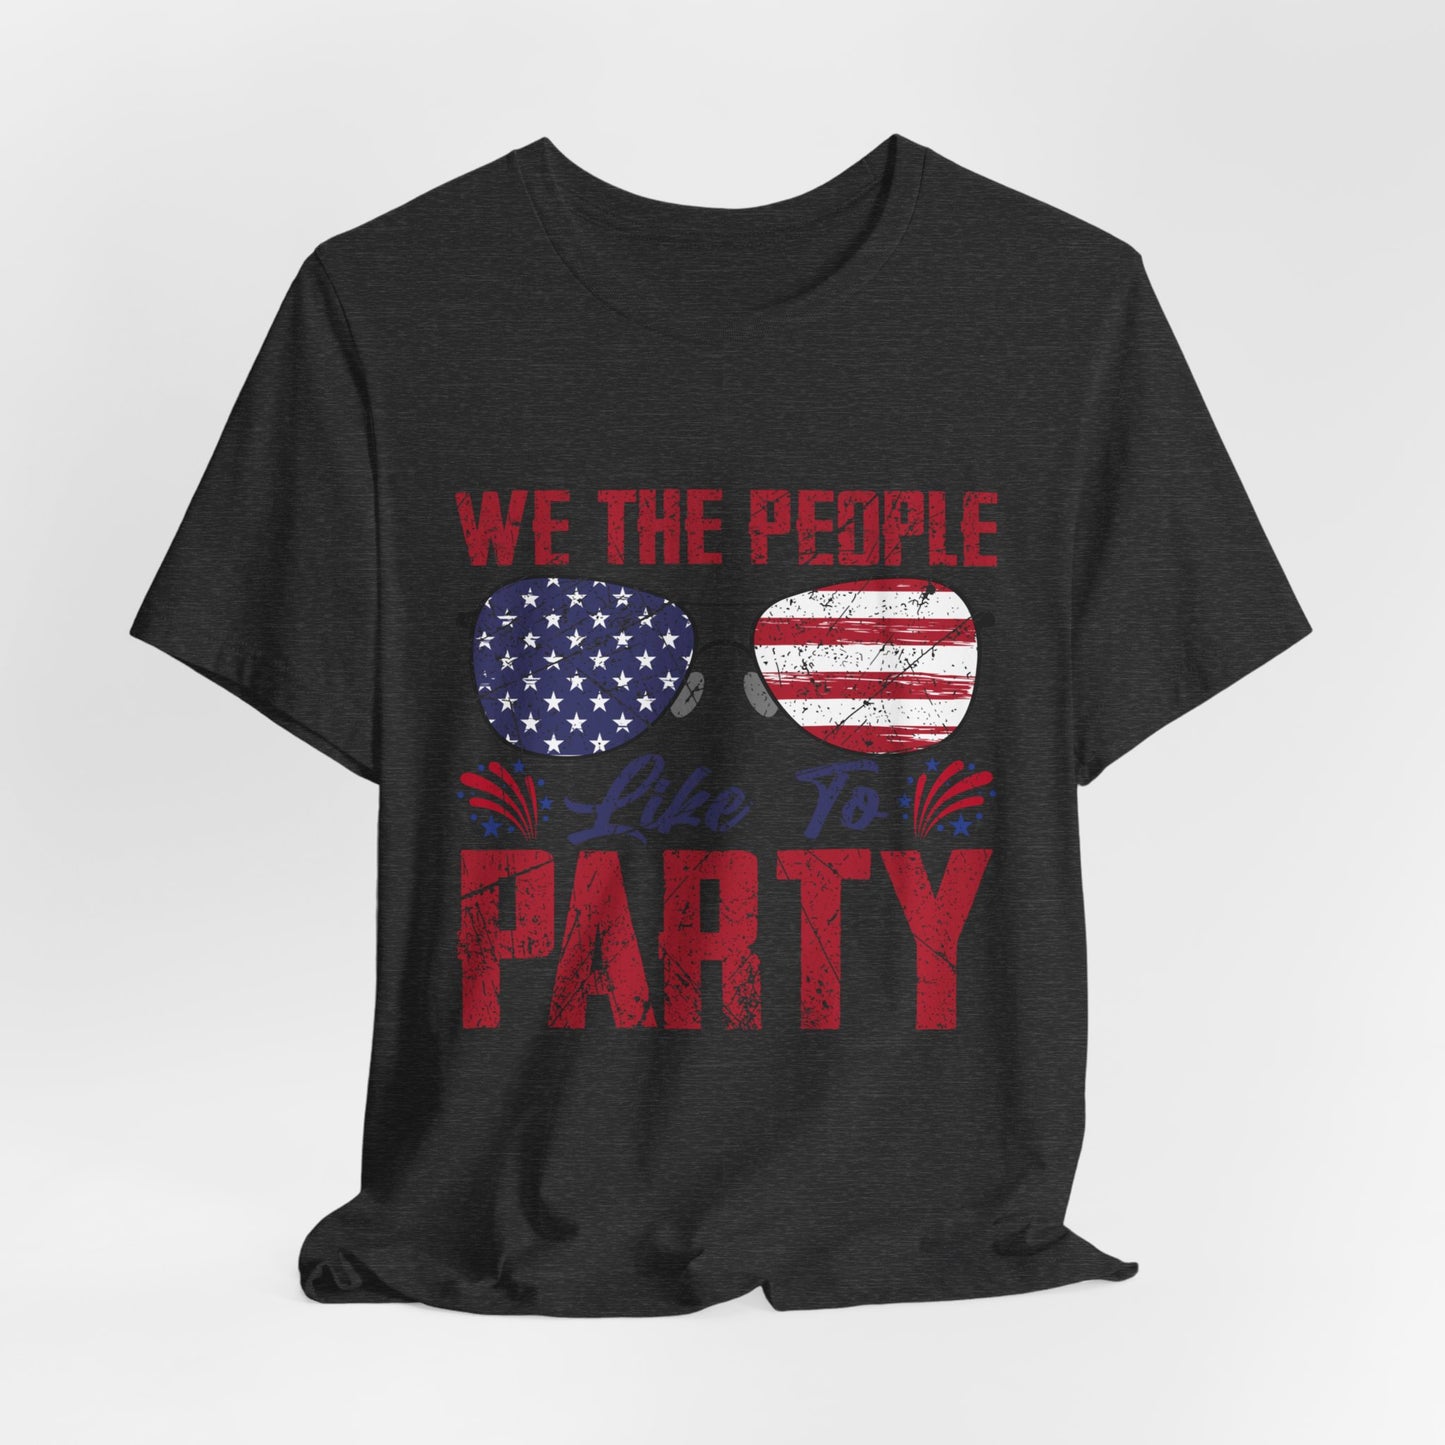 Like to Party America Women's Short Sleeve Tee